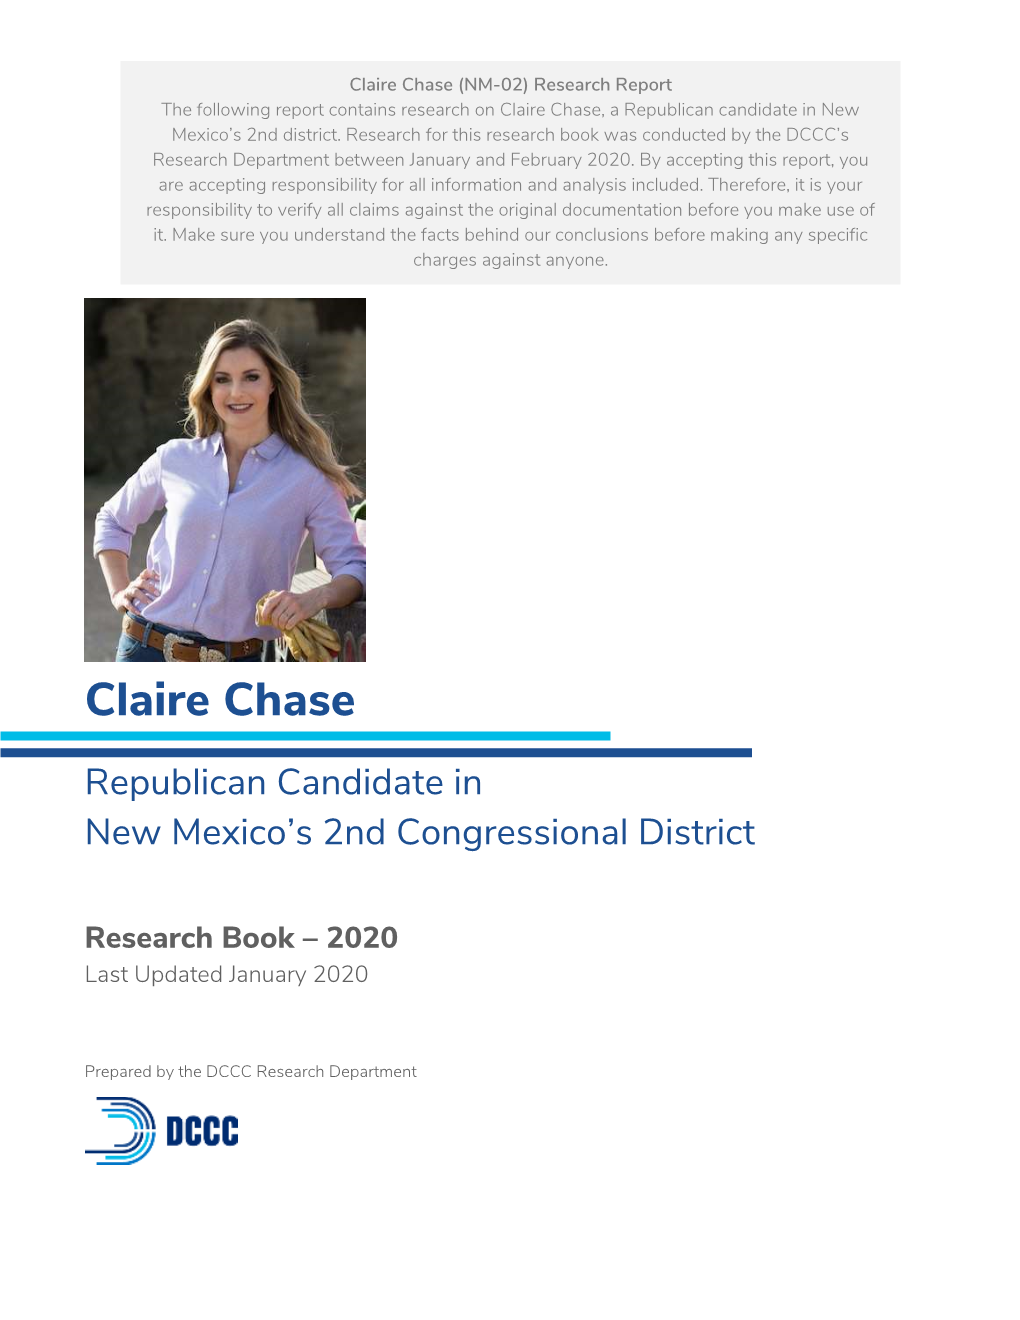 Claire Chase (NM-02) Research Report the Following Report Contains Research on Claire Chase, a Republican Candidate in New Mexico’S 2Nd District